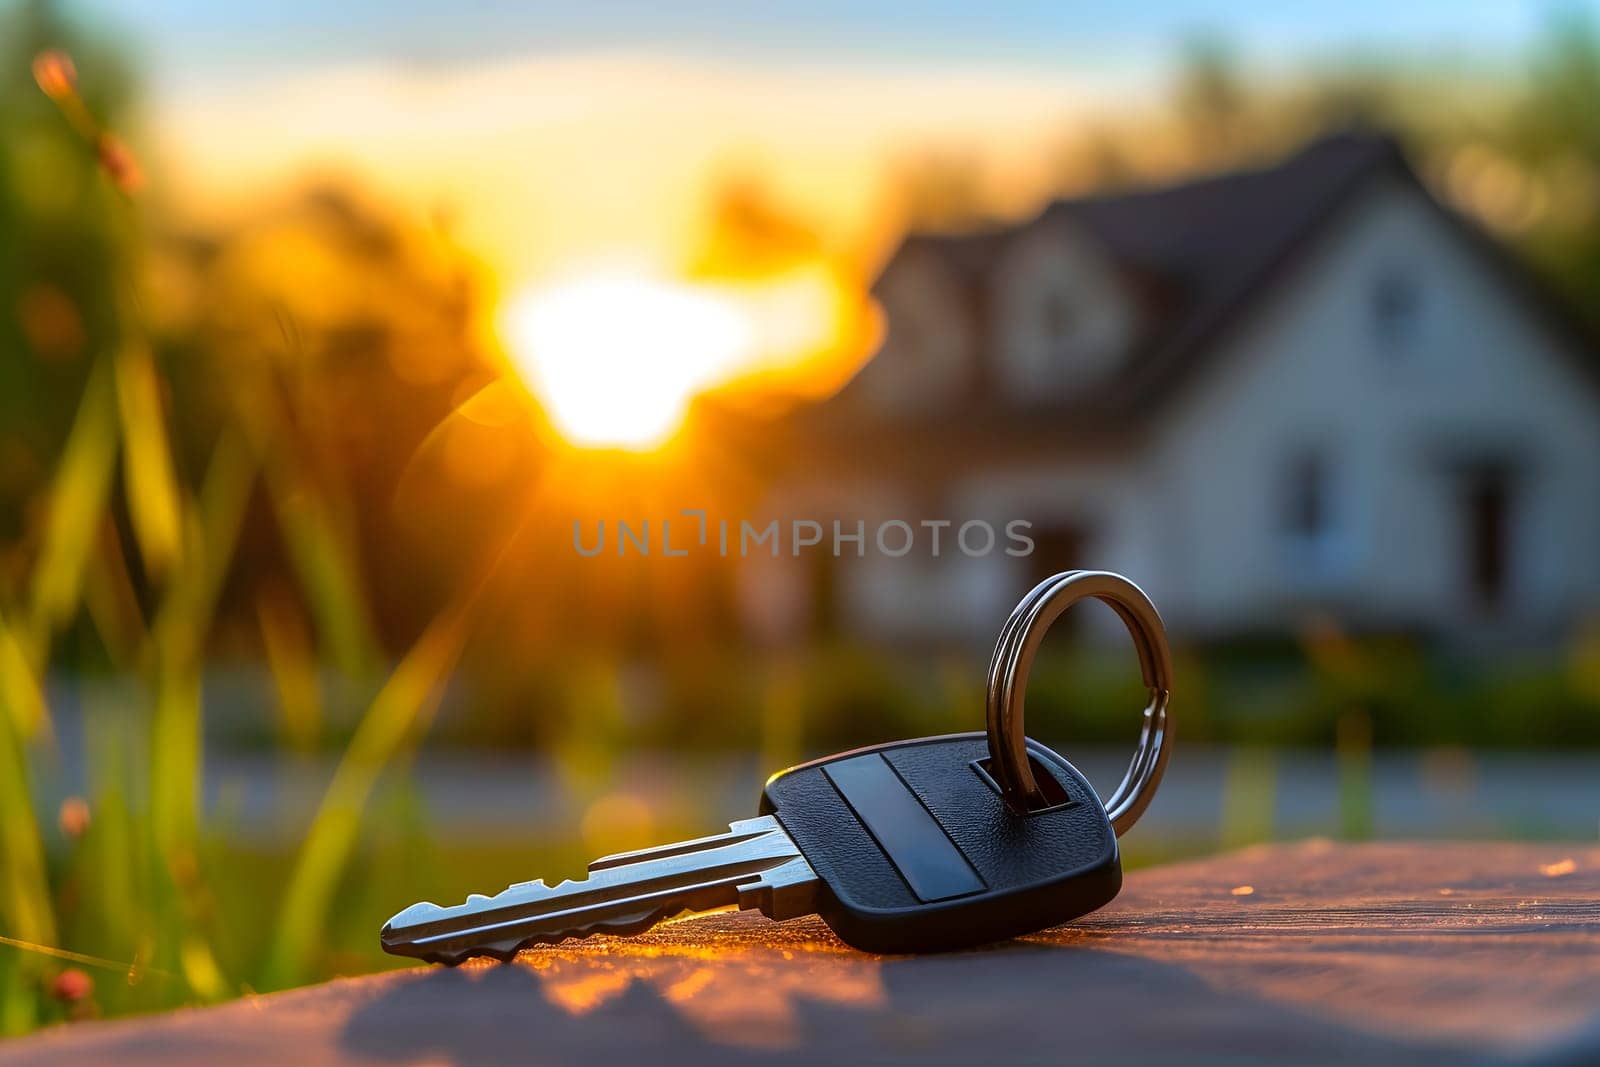 Keys in front of new house at sunny summer morning or evening. Neural network generated image. Not based on any actual person or scene.